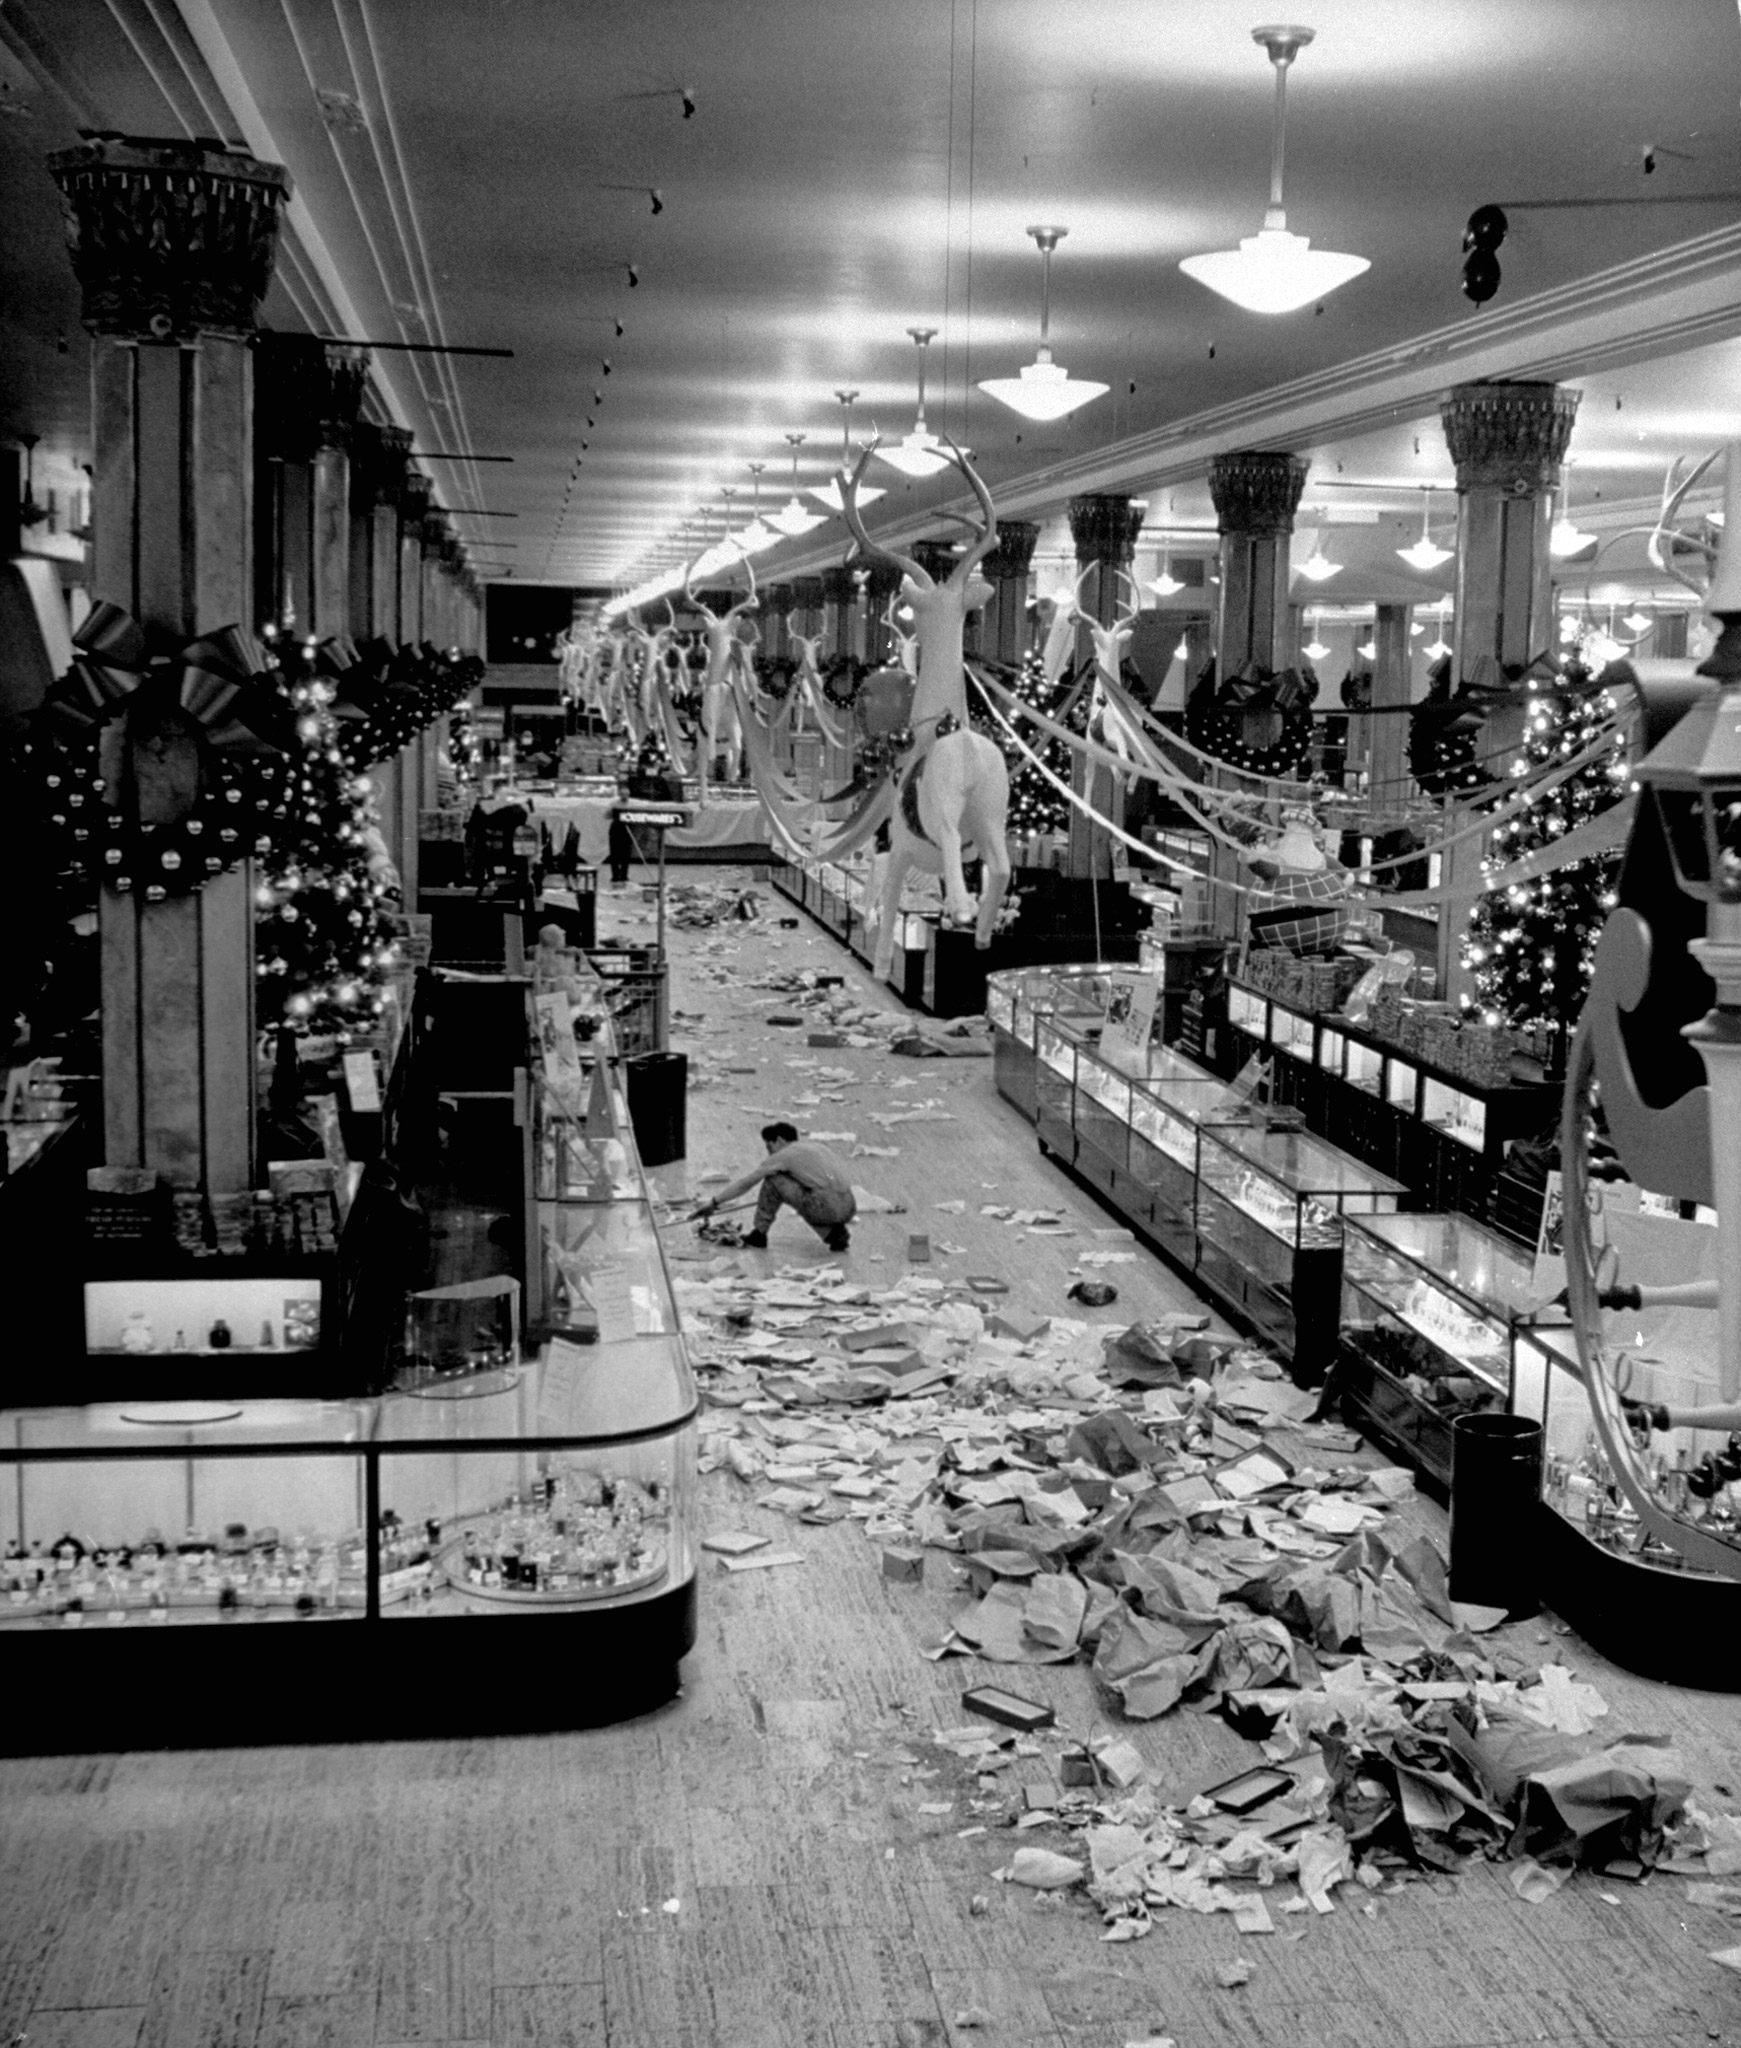 Macy's department store employee cleaning up piles of debris after the Christmas shopping rush, 1948.